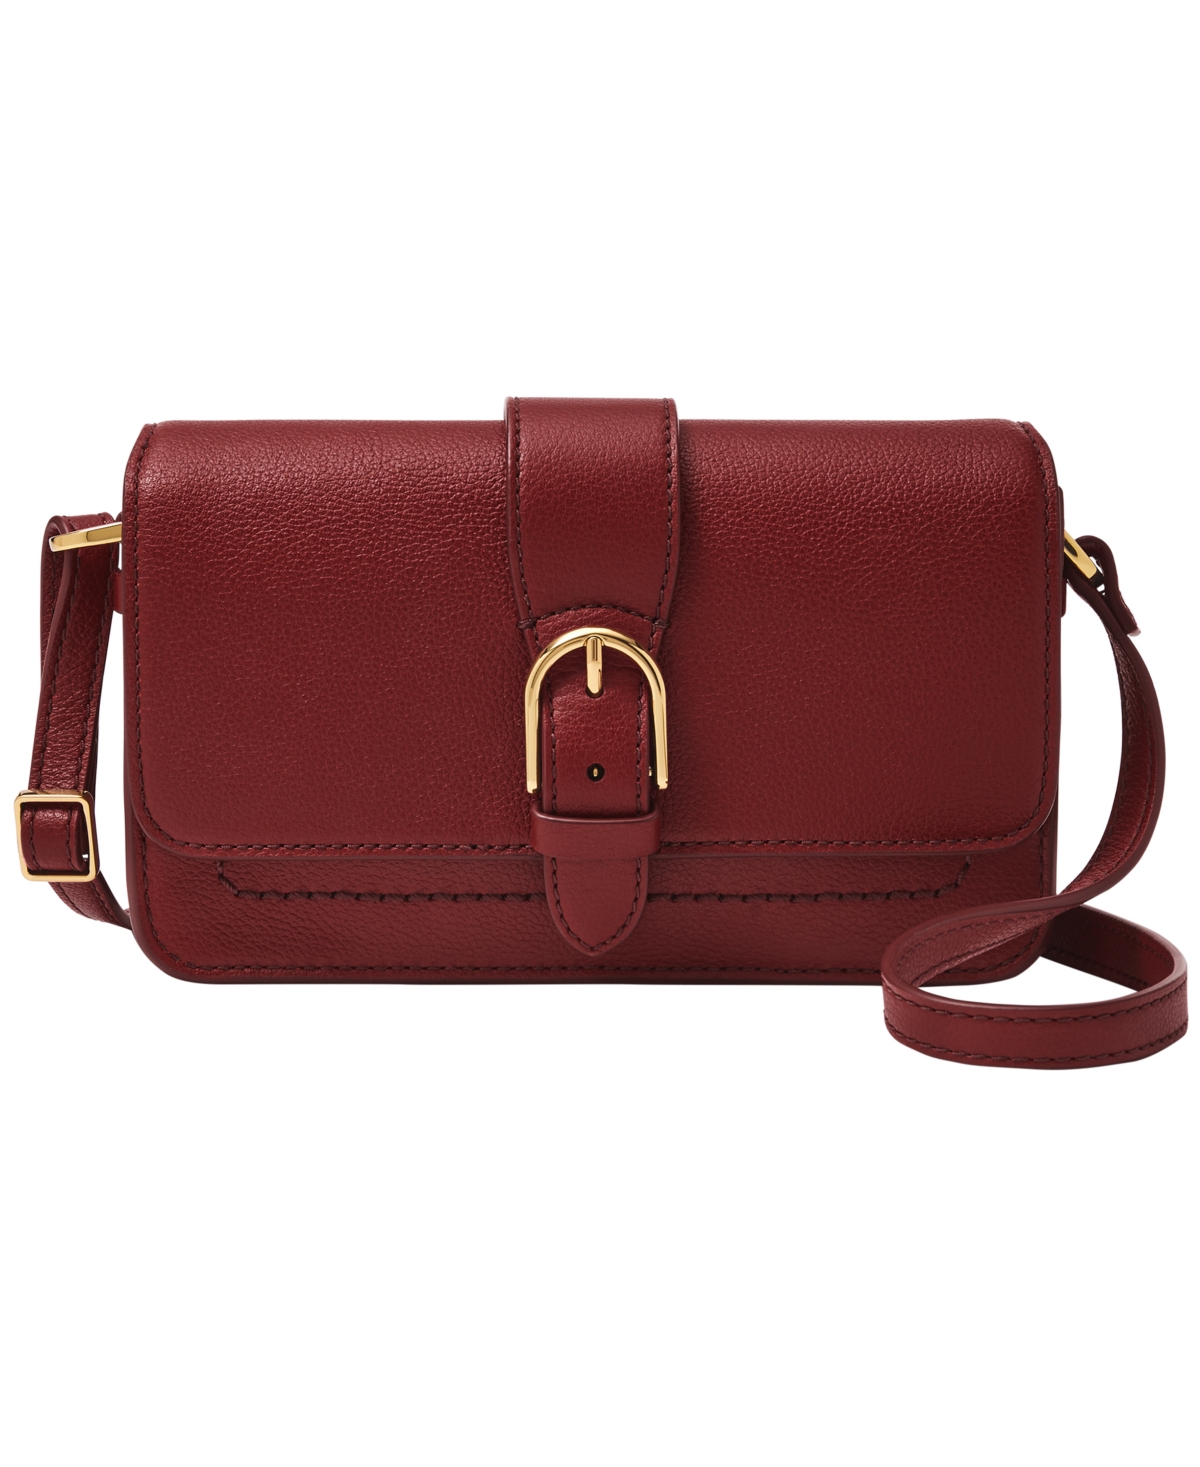 Fossil Zoey Leather Crossbody Bag In Scarlet